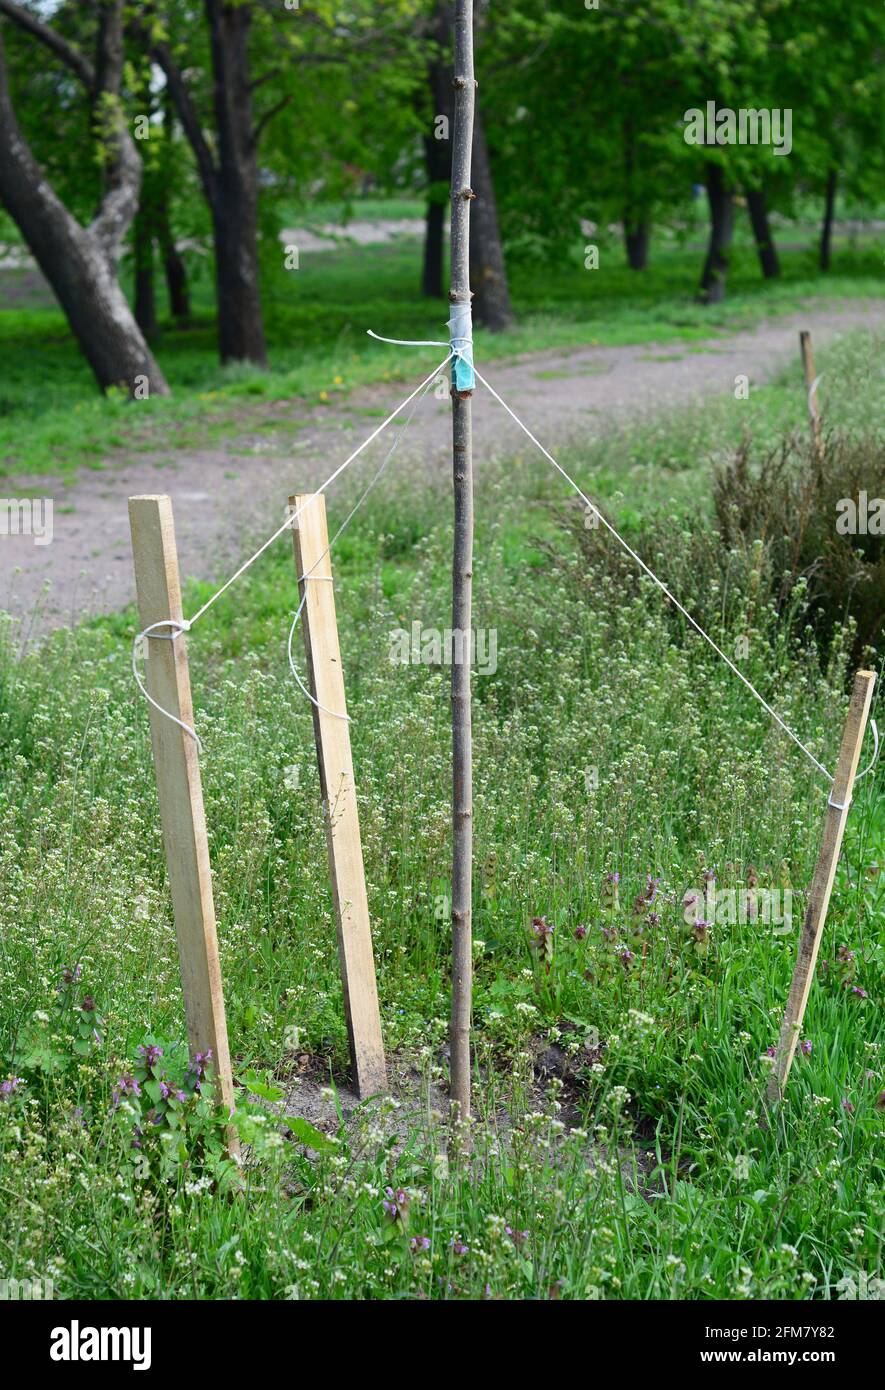 Staking a newly planted tree. Tree staking in windy areas. Supporting a tree trunk with stakes to grow a straight tree. Stock Photo